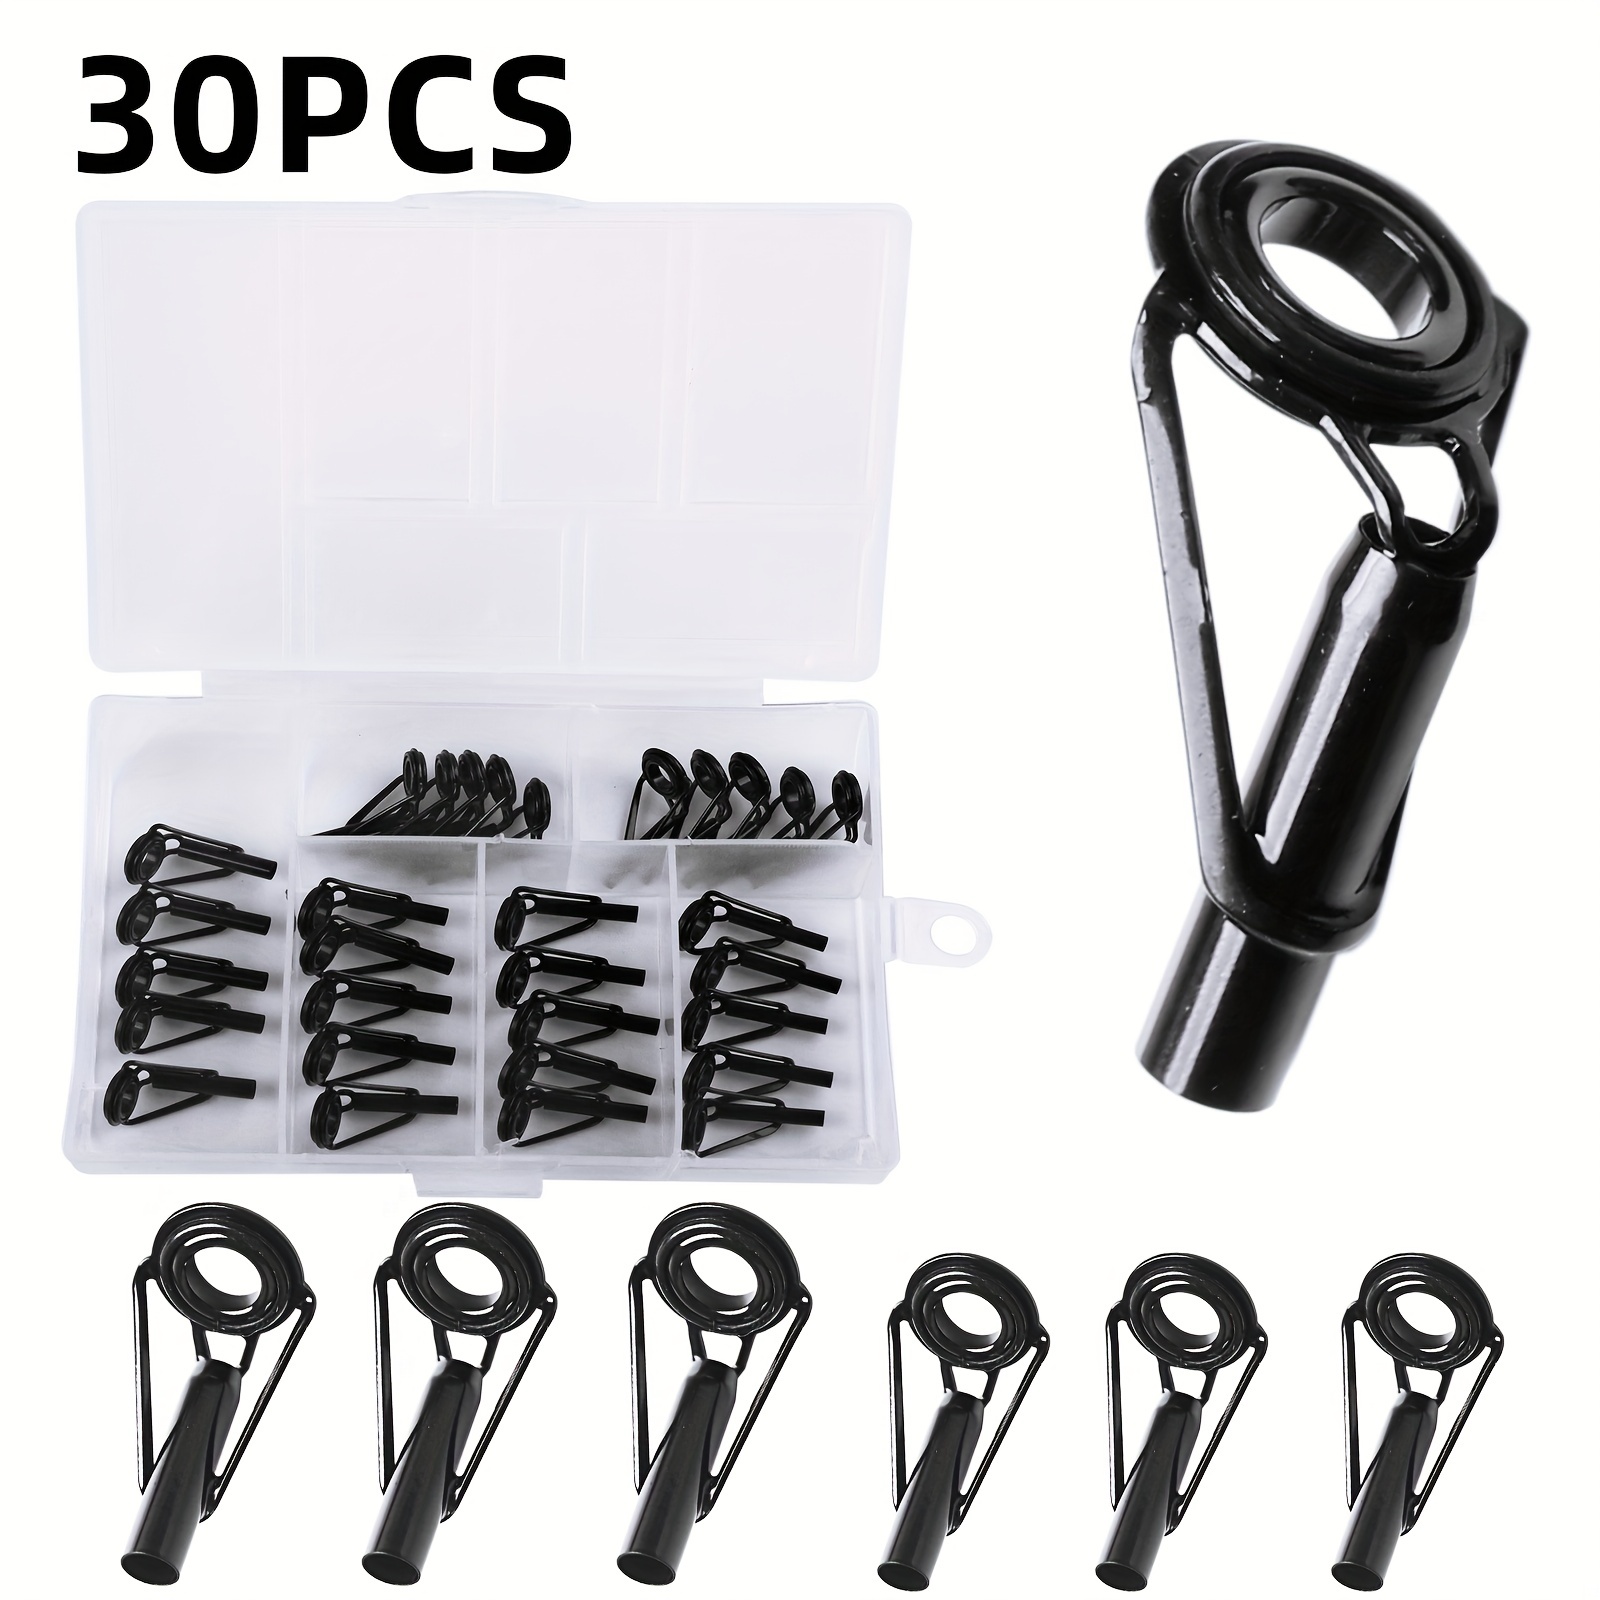 30pcs Durable Fishing Rod Tip Repair Kit with Stainless Steel Ceramic  Guides - Replacement Accessories for Enhanced Fishing Experience